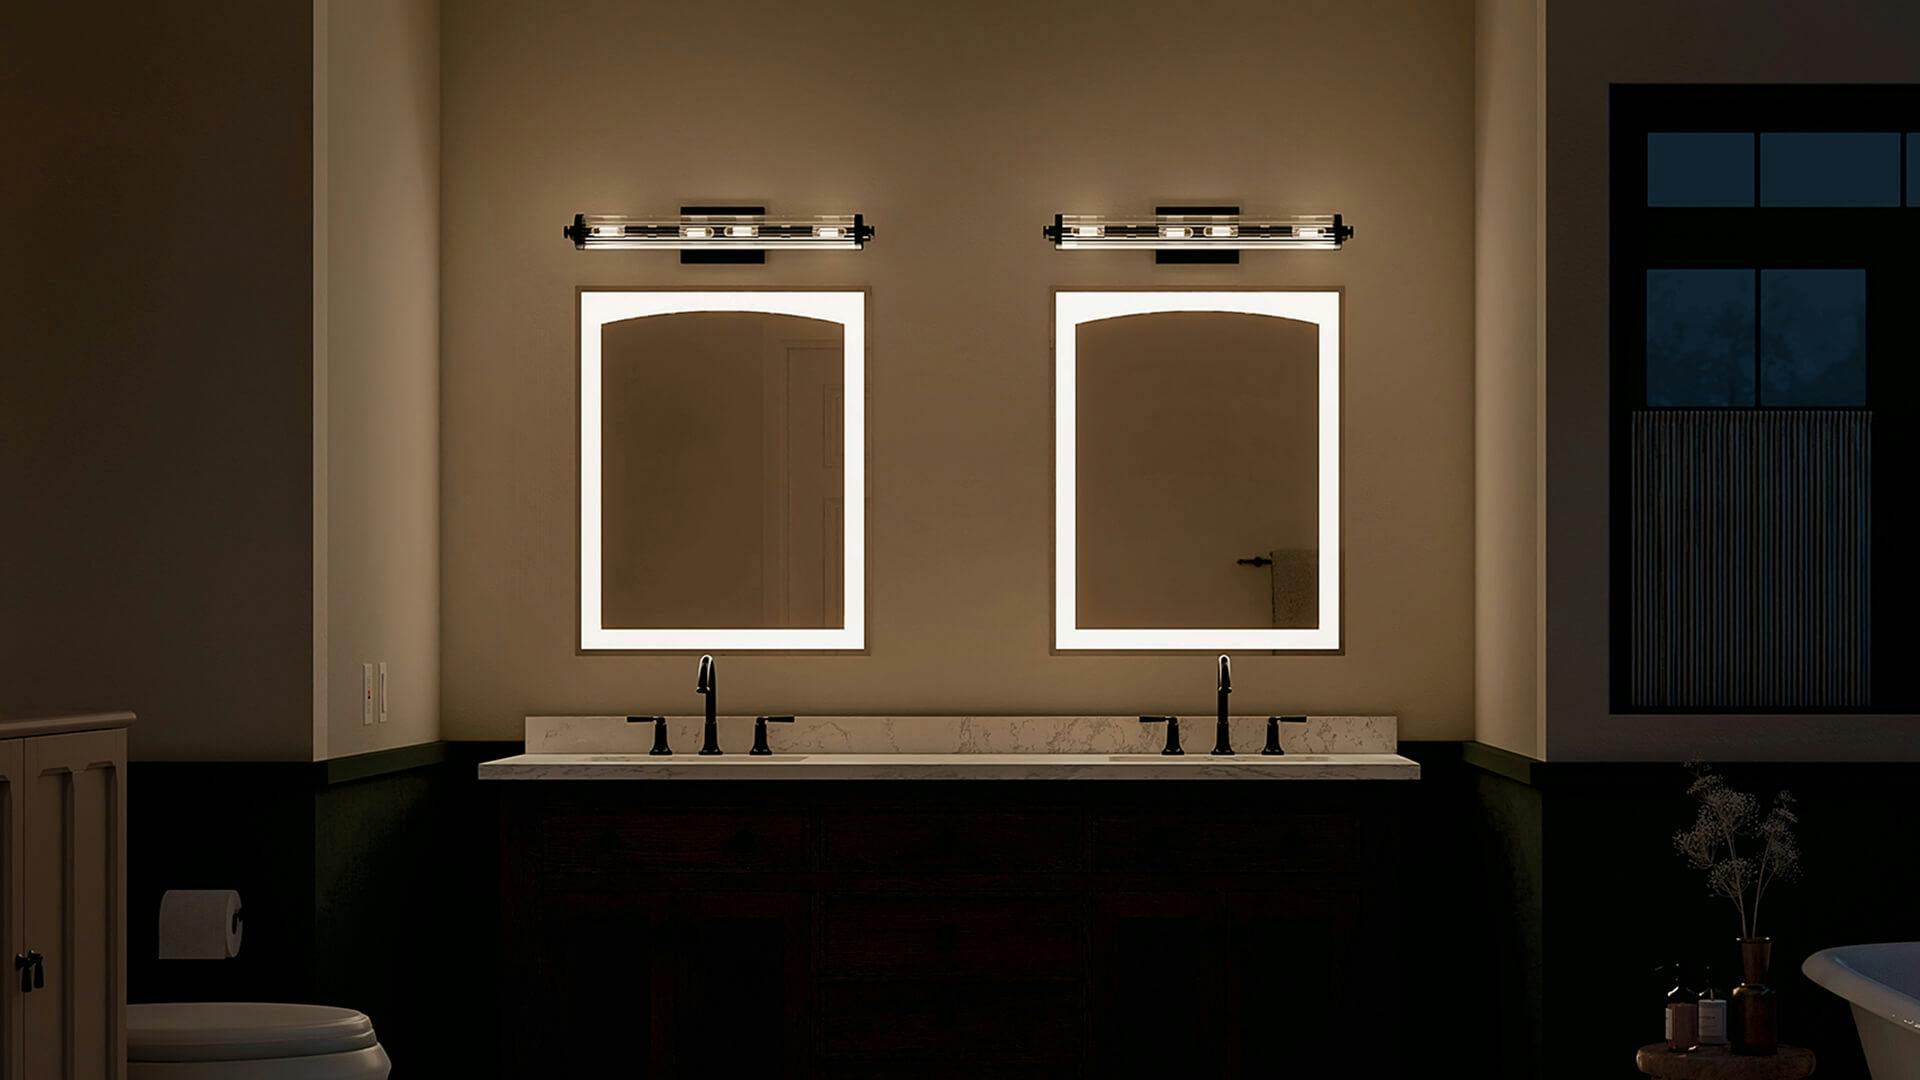 Dual mirrors and sink bathroom at night with Azores sconces above the mirrors